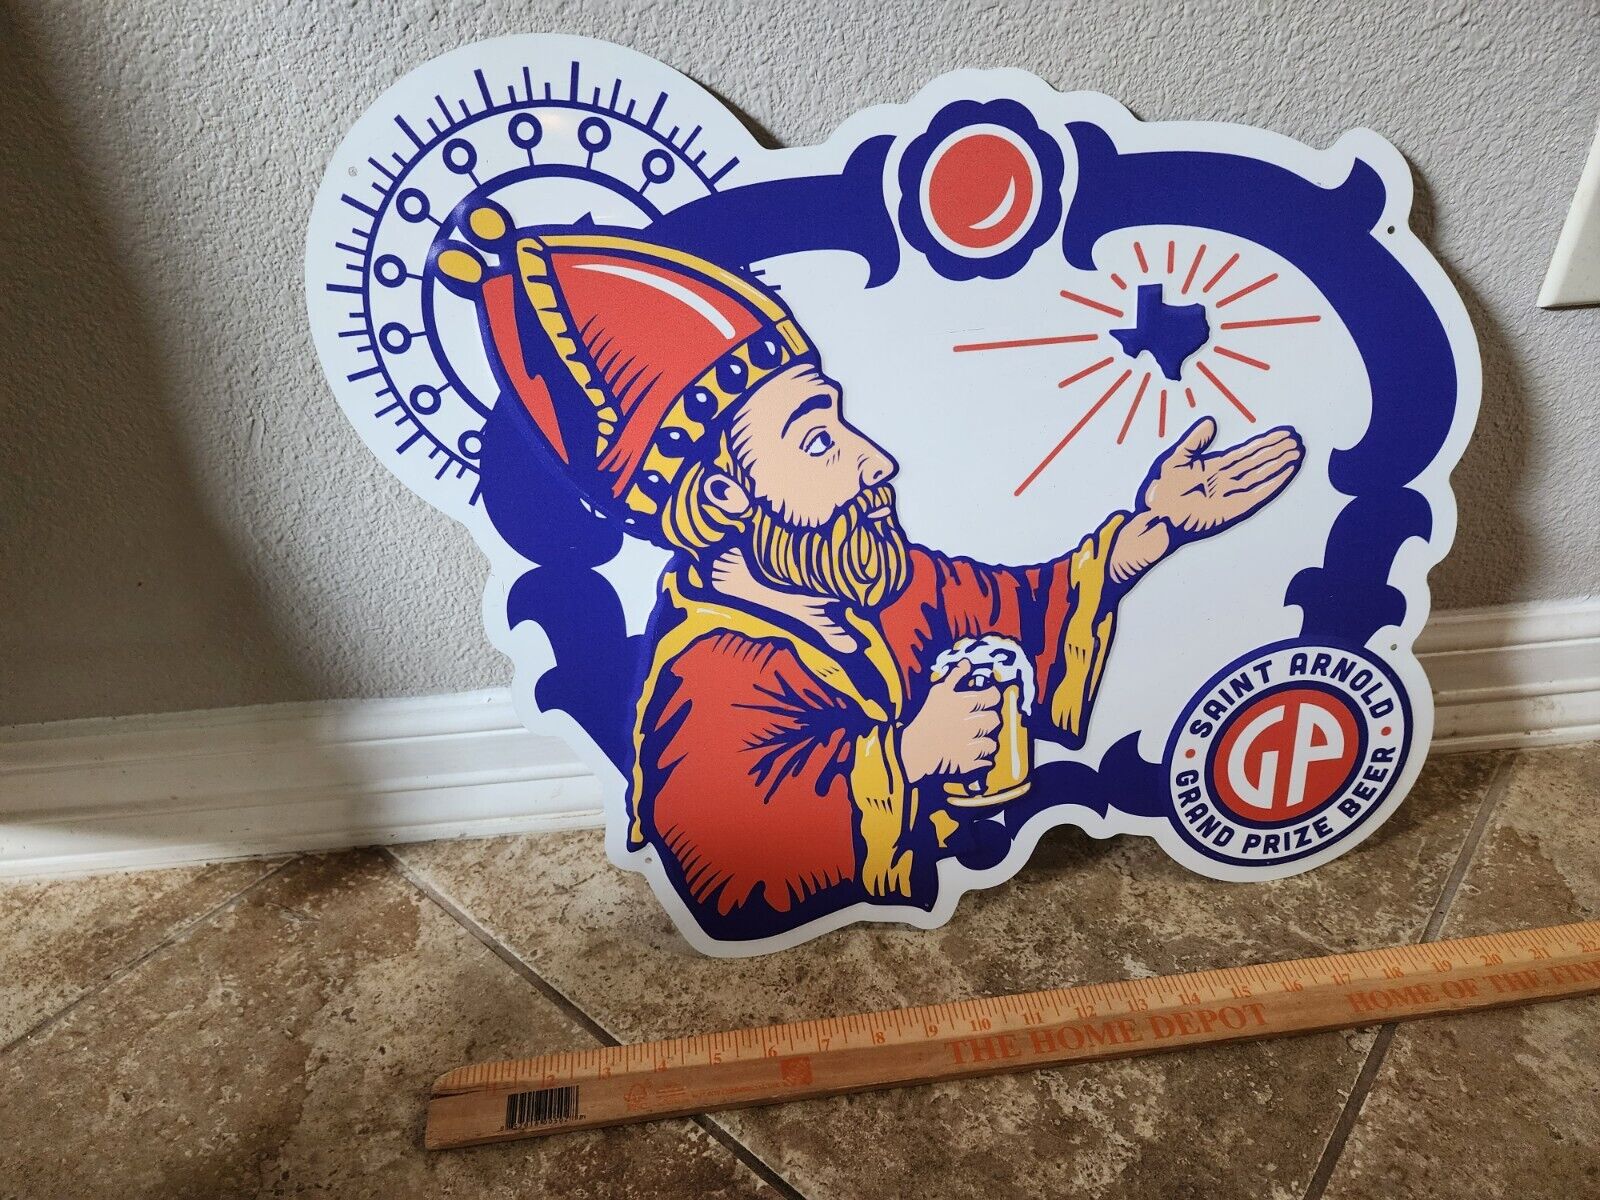 ST ARNOLD BREWING COMPANY GRAND PRIZE BEER BAR SIGN MAN CAVE DECOR RARE